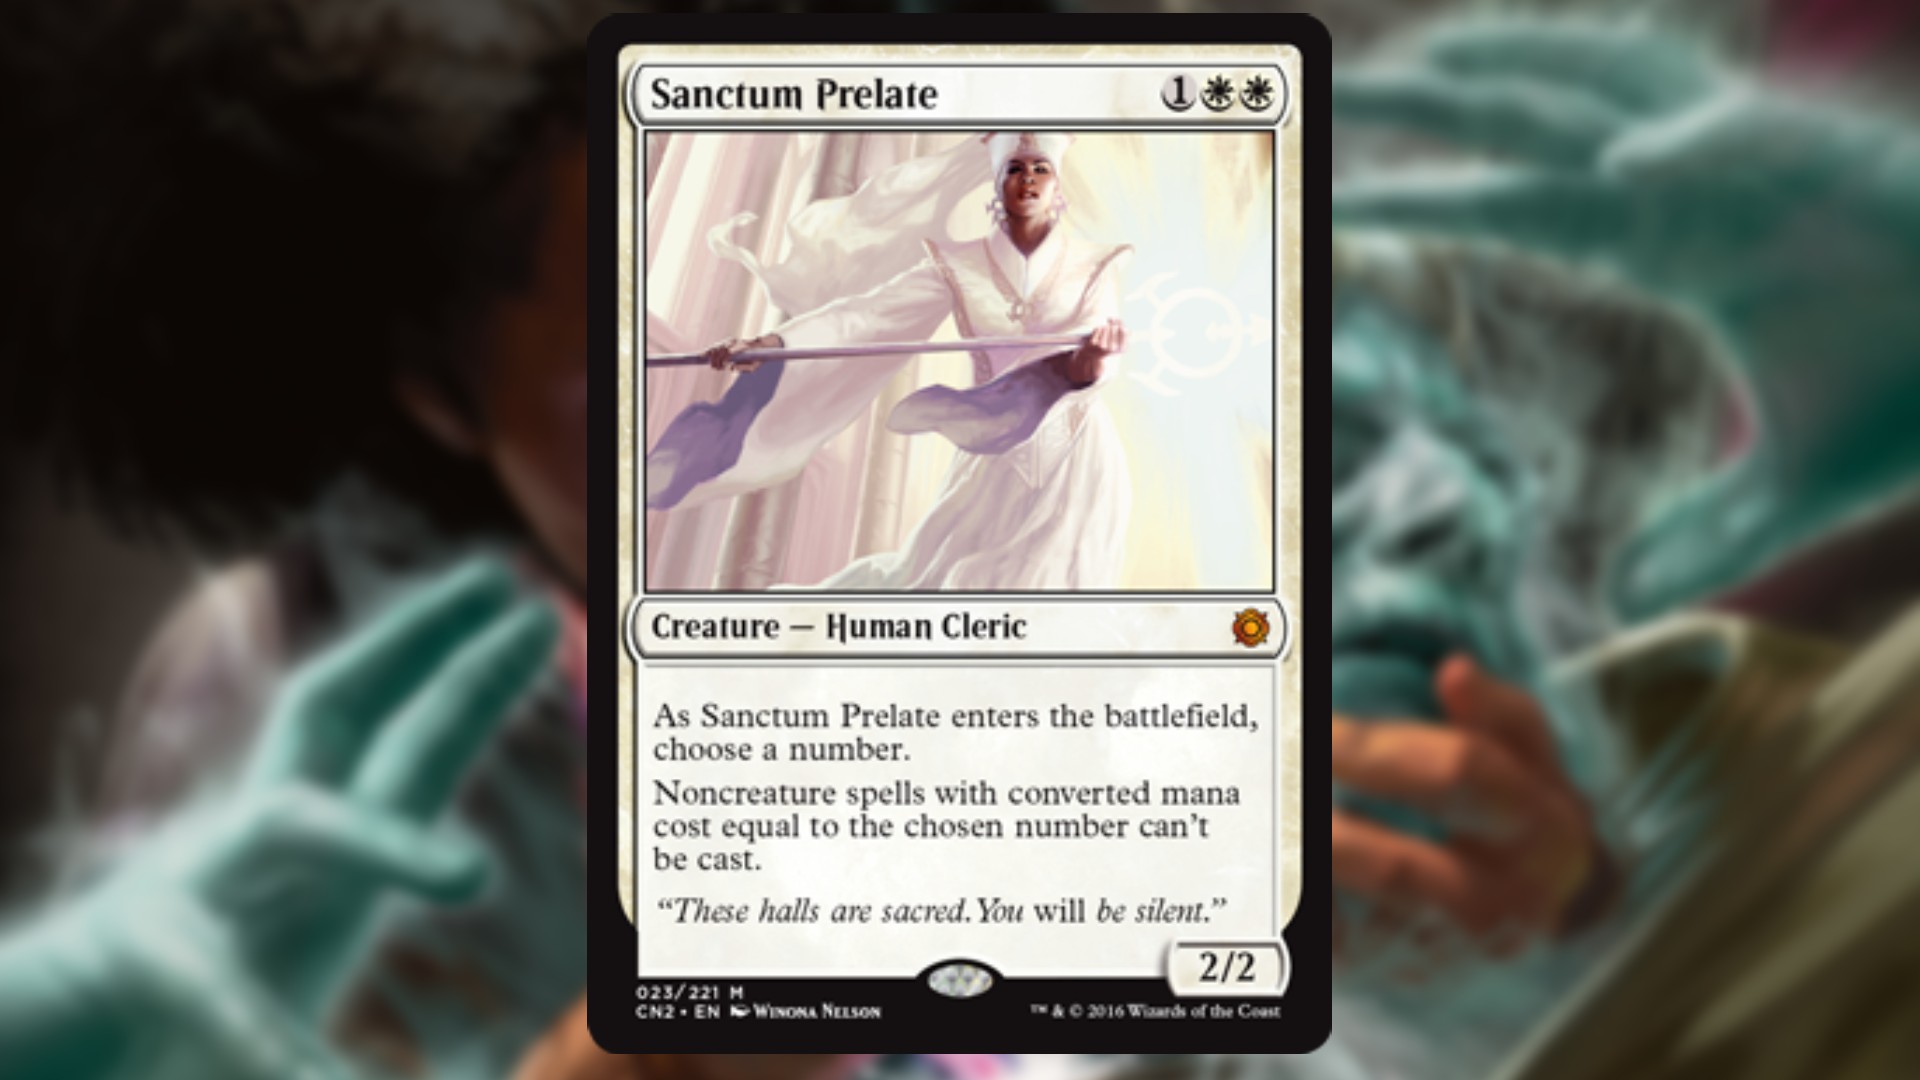 magic the gathering card in white with art depicting a human cleric in white robes holding a horizontal white staff